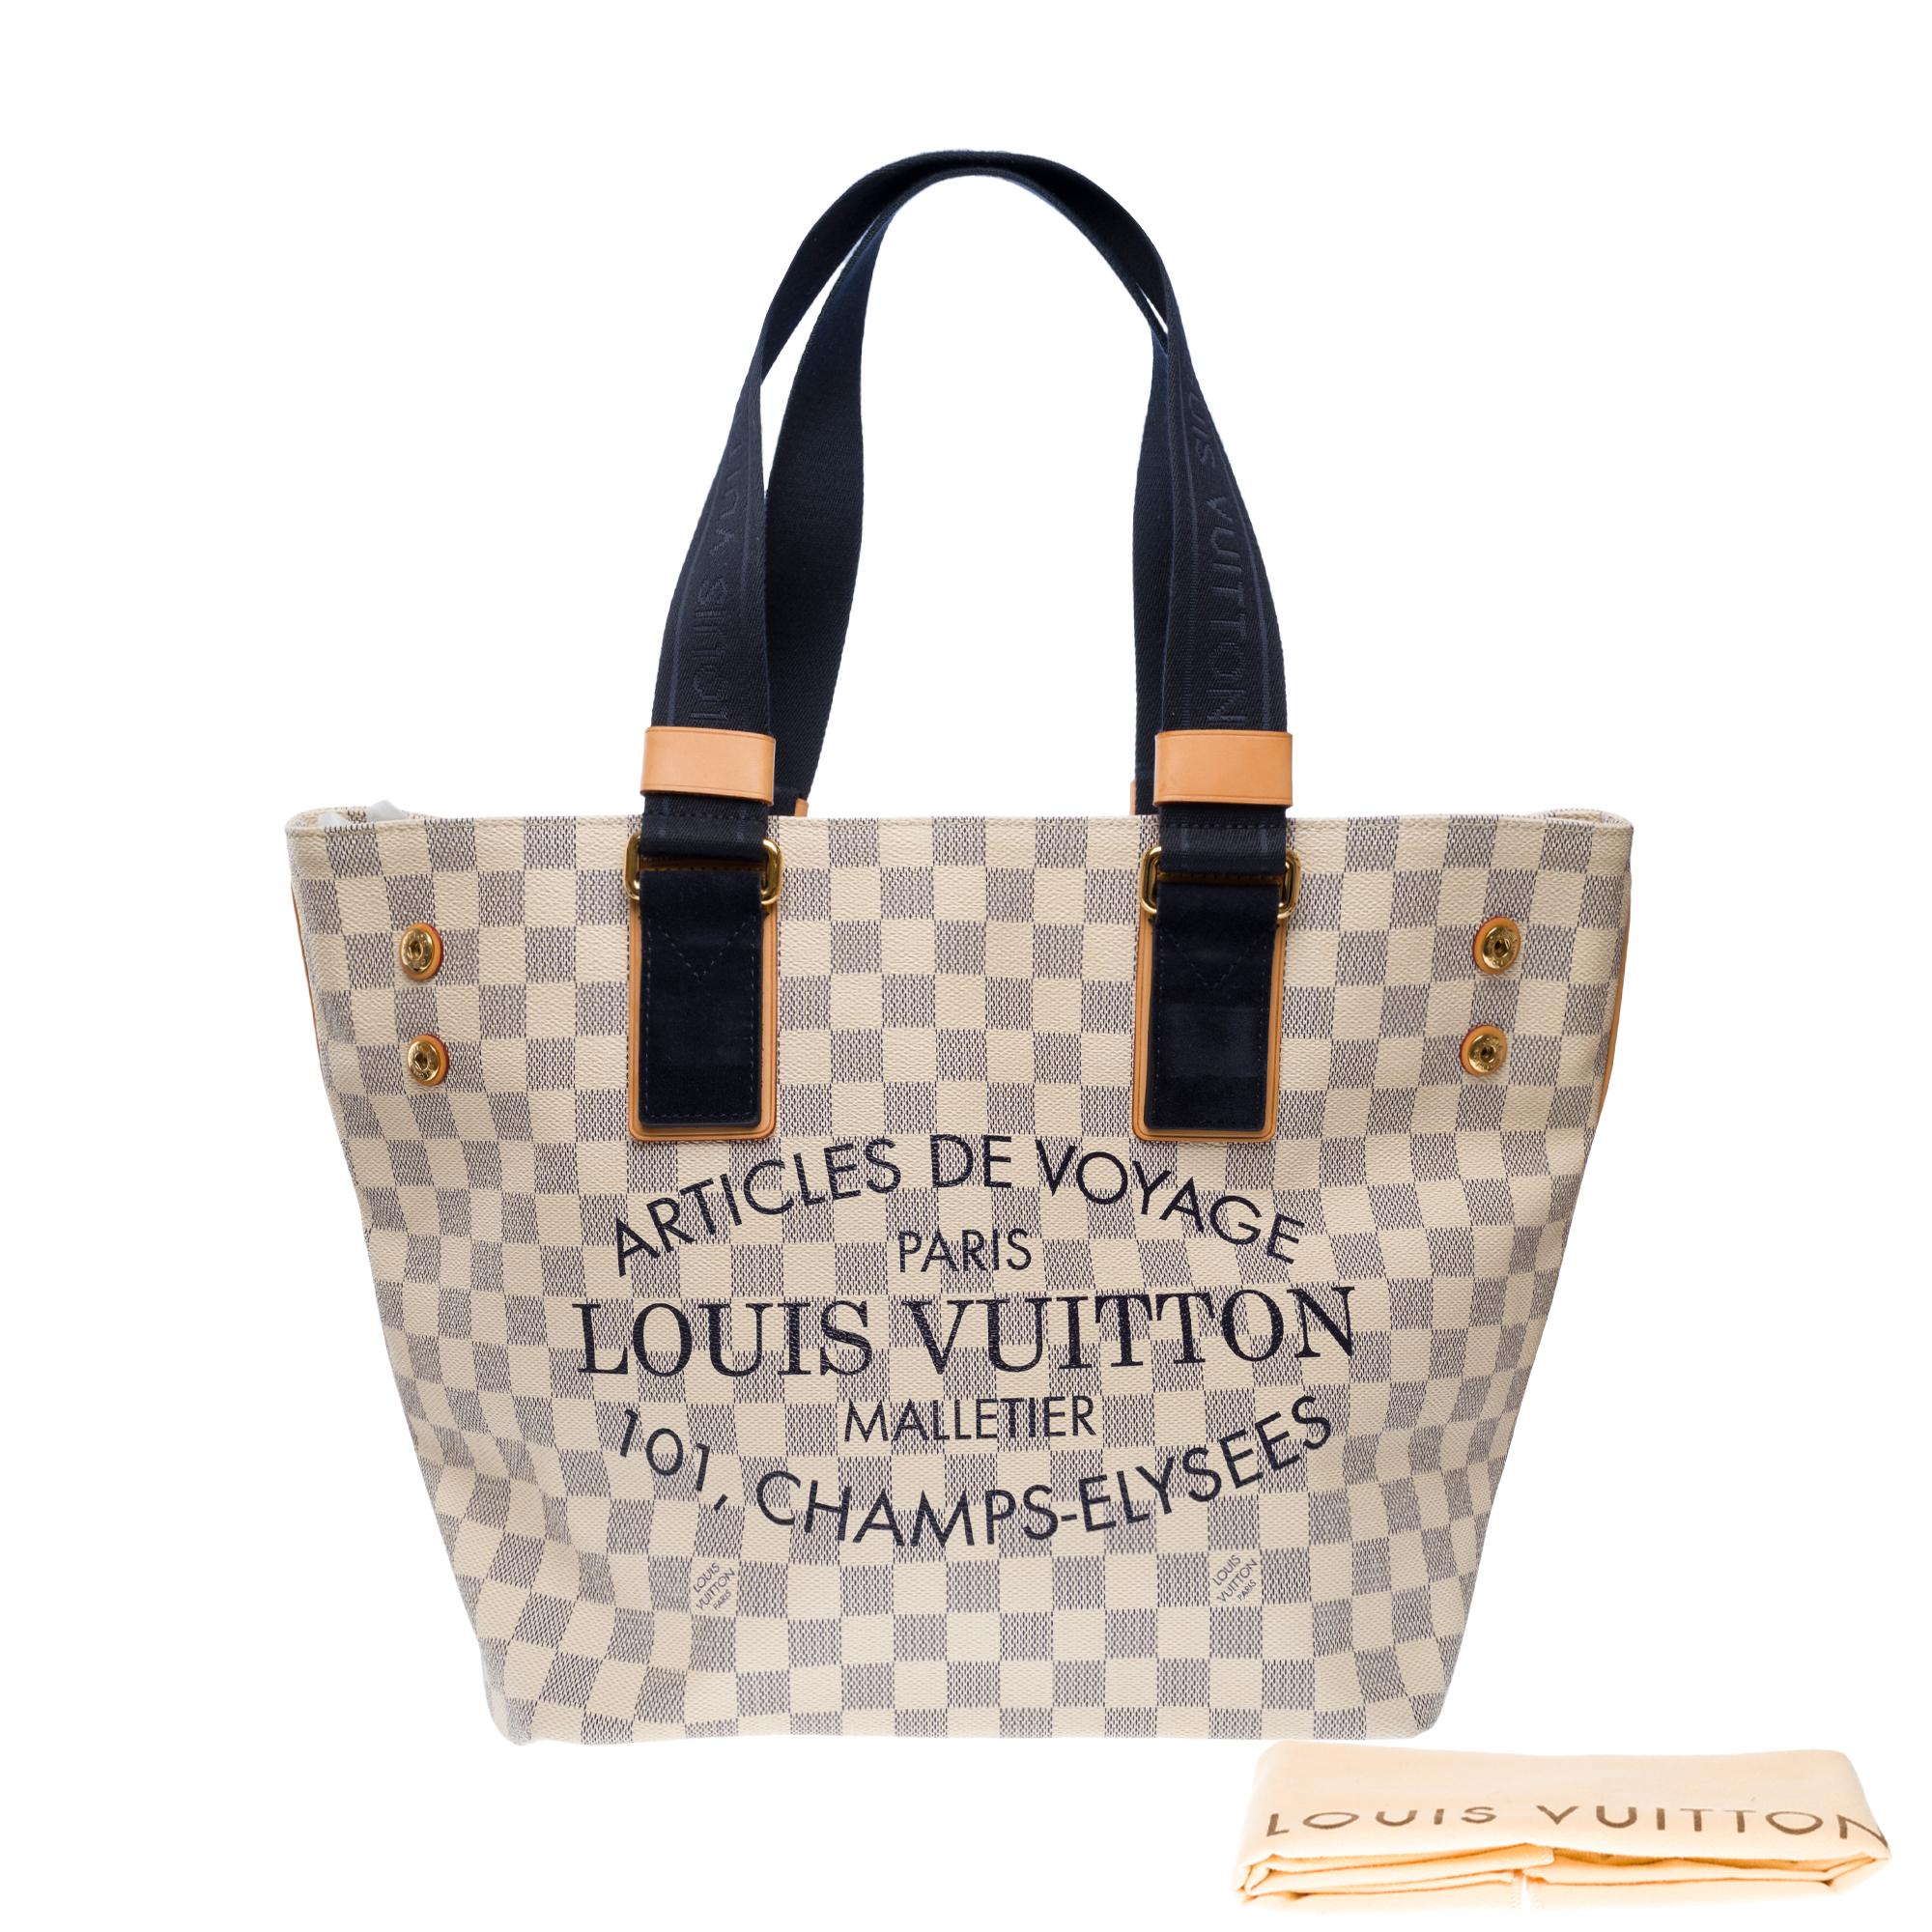 Amazing Louis Vuitton tote bag in azur checkered canvas and natural leather, golden metal trim, yellow stitching, double handle in navy blue canvas for a hand or shoulder carry

Snap fastener
Inner lining in beige canvas, one zipped